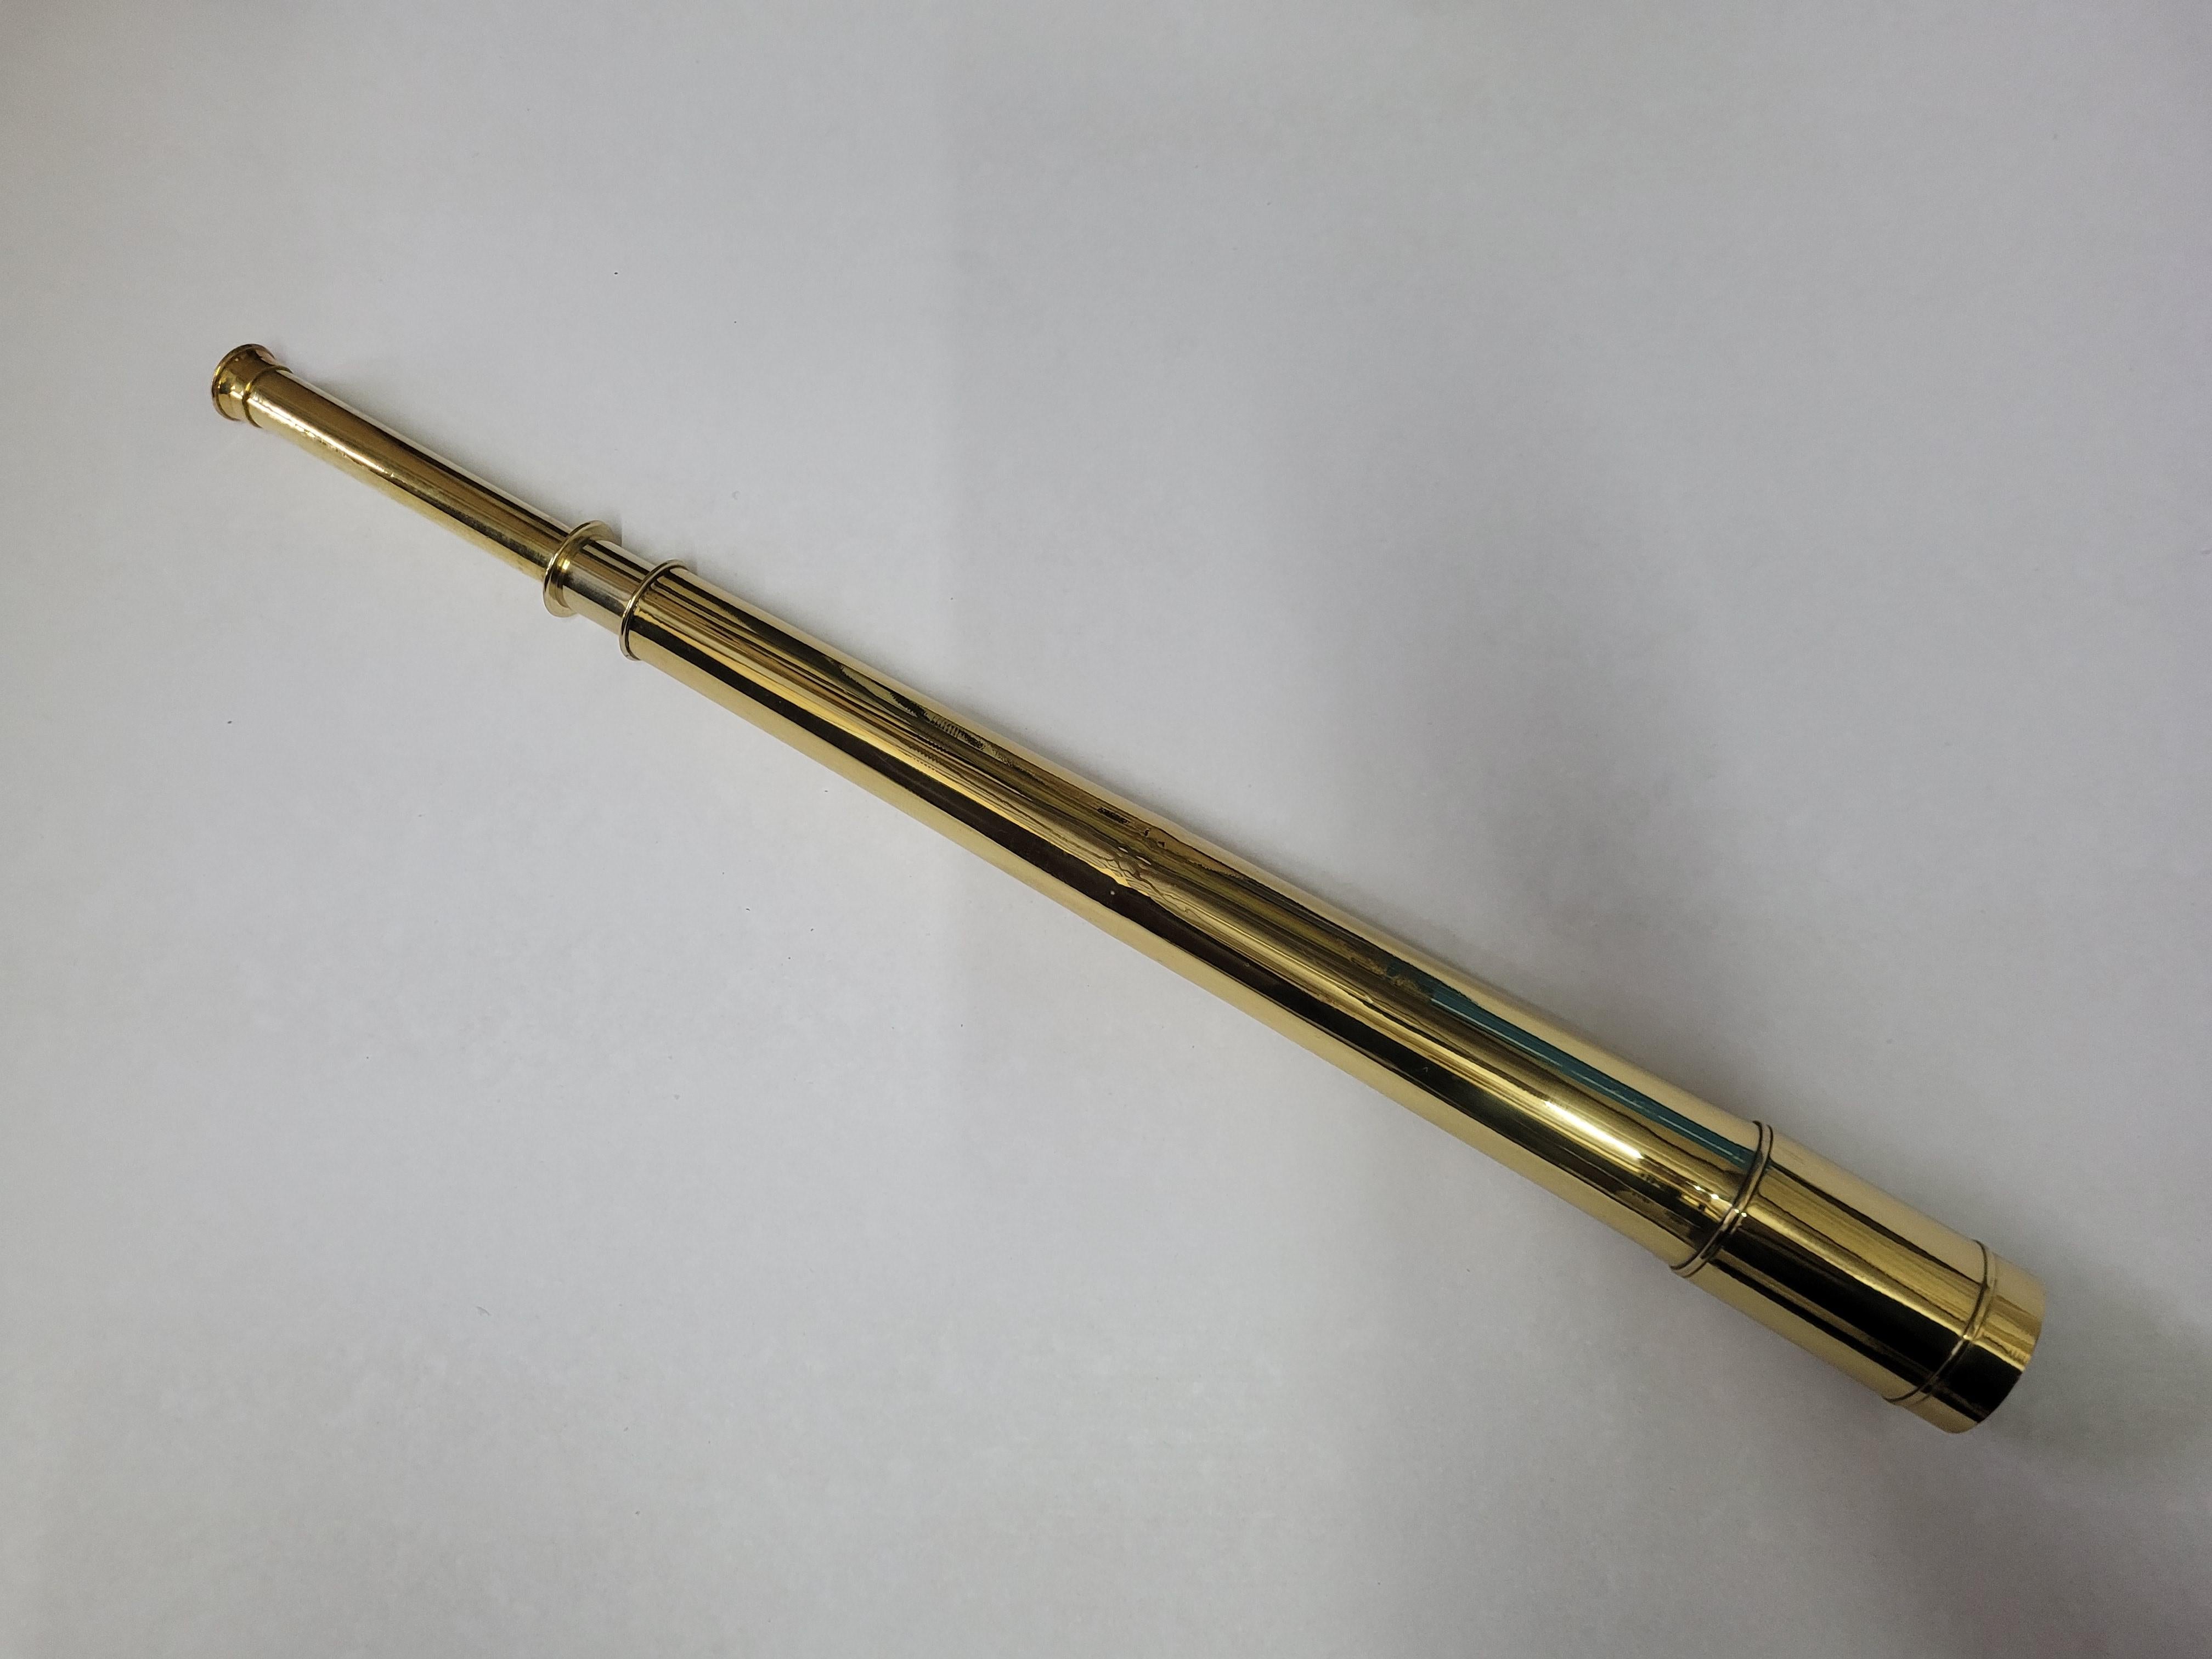 Ships spyglass telescope appropriate for use on a yacht, ship, or anywhere with a view. This has been meticulously polished and lacquered. We just restored a great collection of these. This fine instrument has a tapered single draw barrel of solid